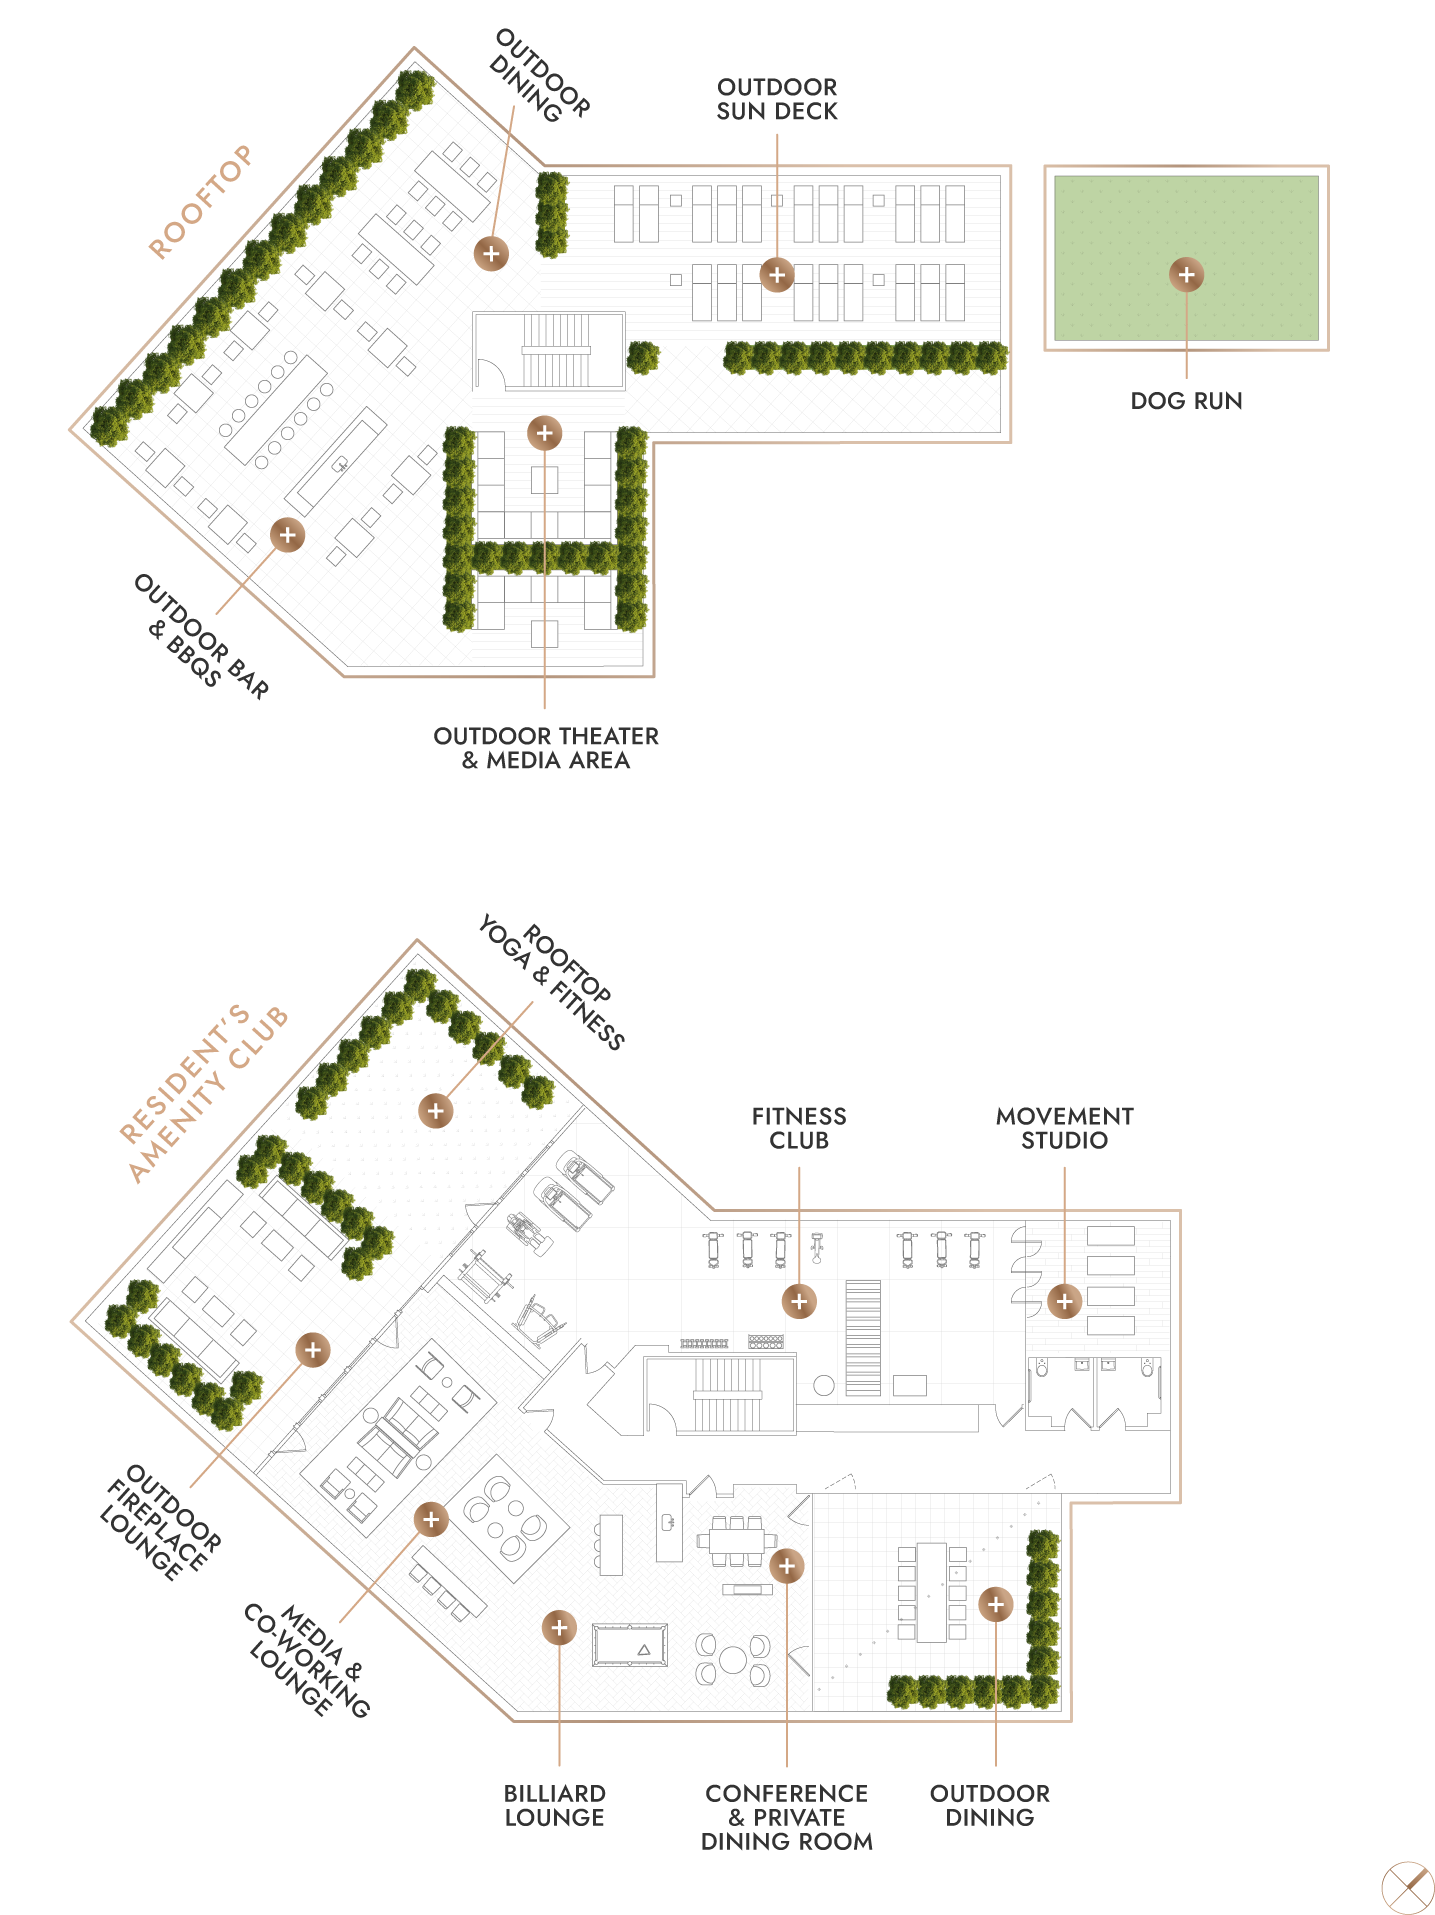 Detailed illustrated map of Amenities including rooftop areas, outdoor fiteness and lounge areas, dog run, fitness and movment centers, conference rooms, lounges and more